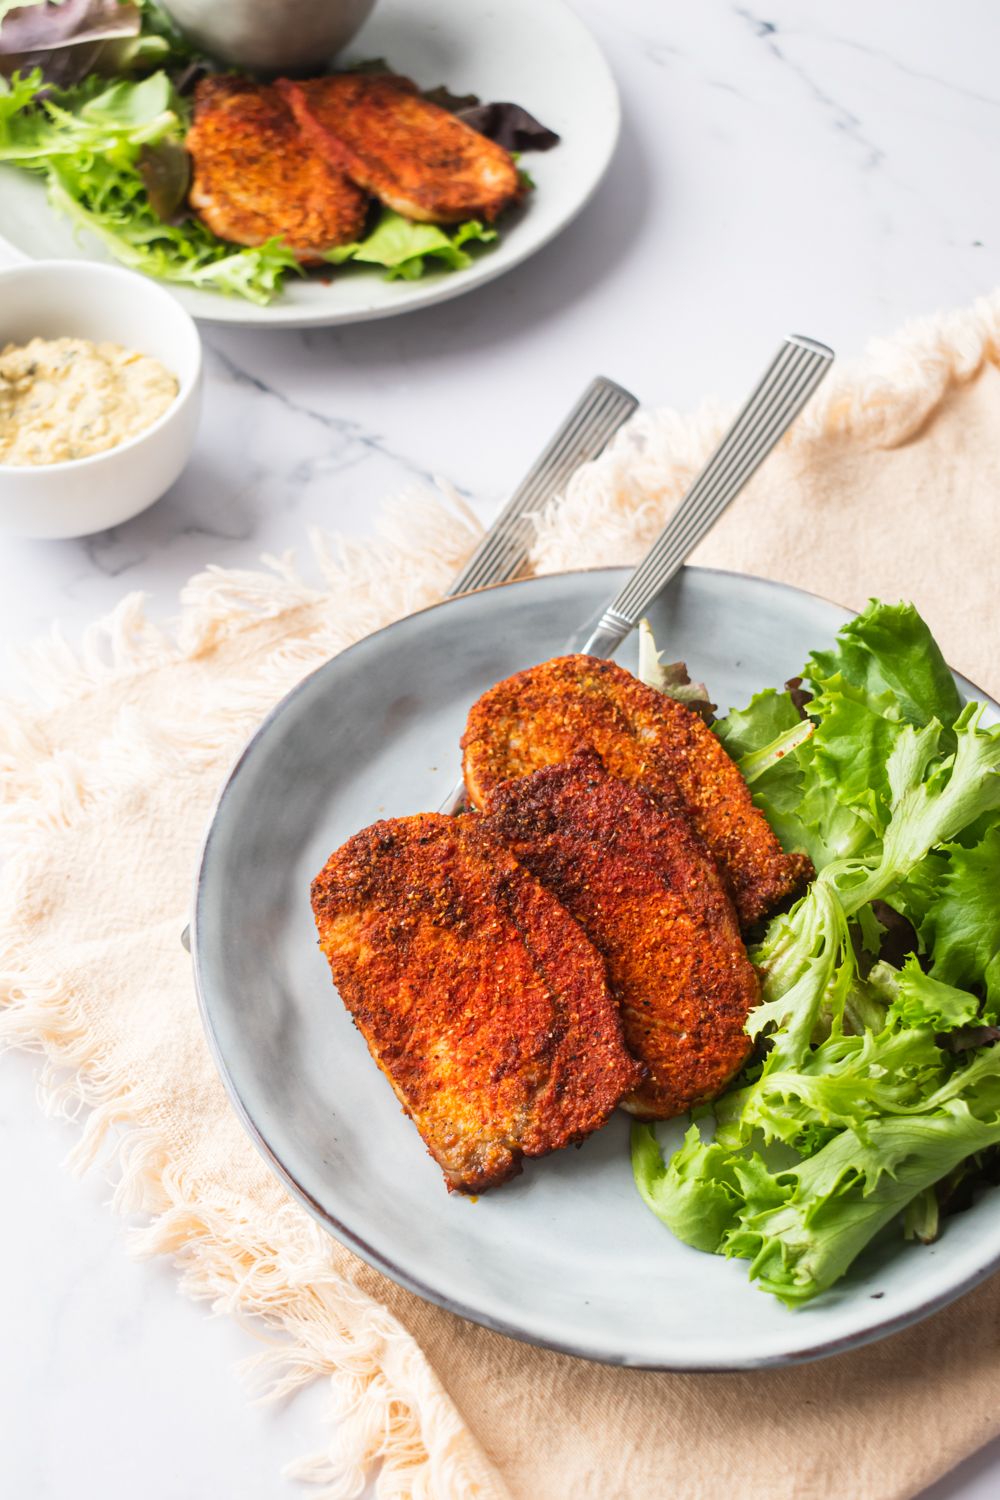 Pork chops with a spice crust on a plate with green salad on a yellow napkin.